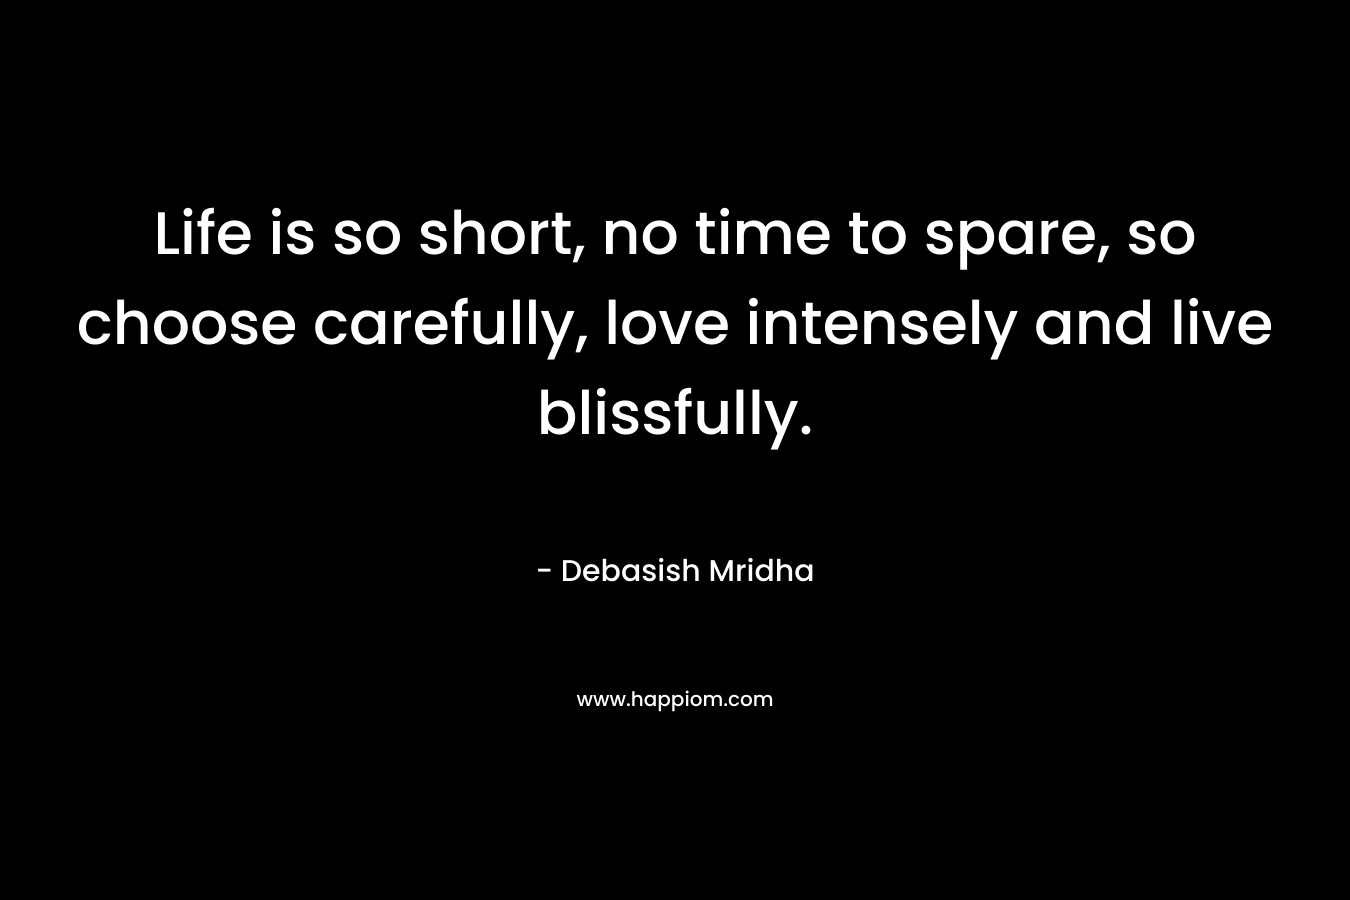 Life is so short, no time to spare, so choose carefully, love intensely and live blissfully. – Debasish Mridha